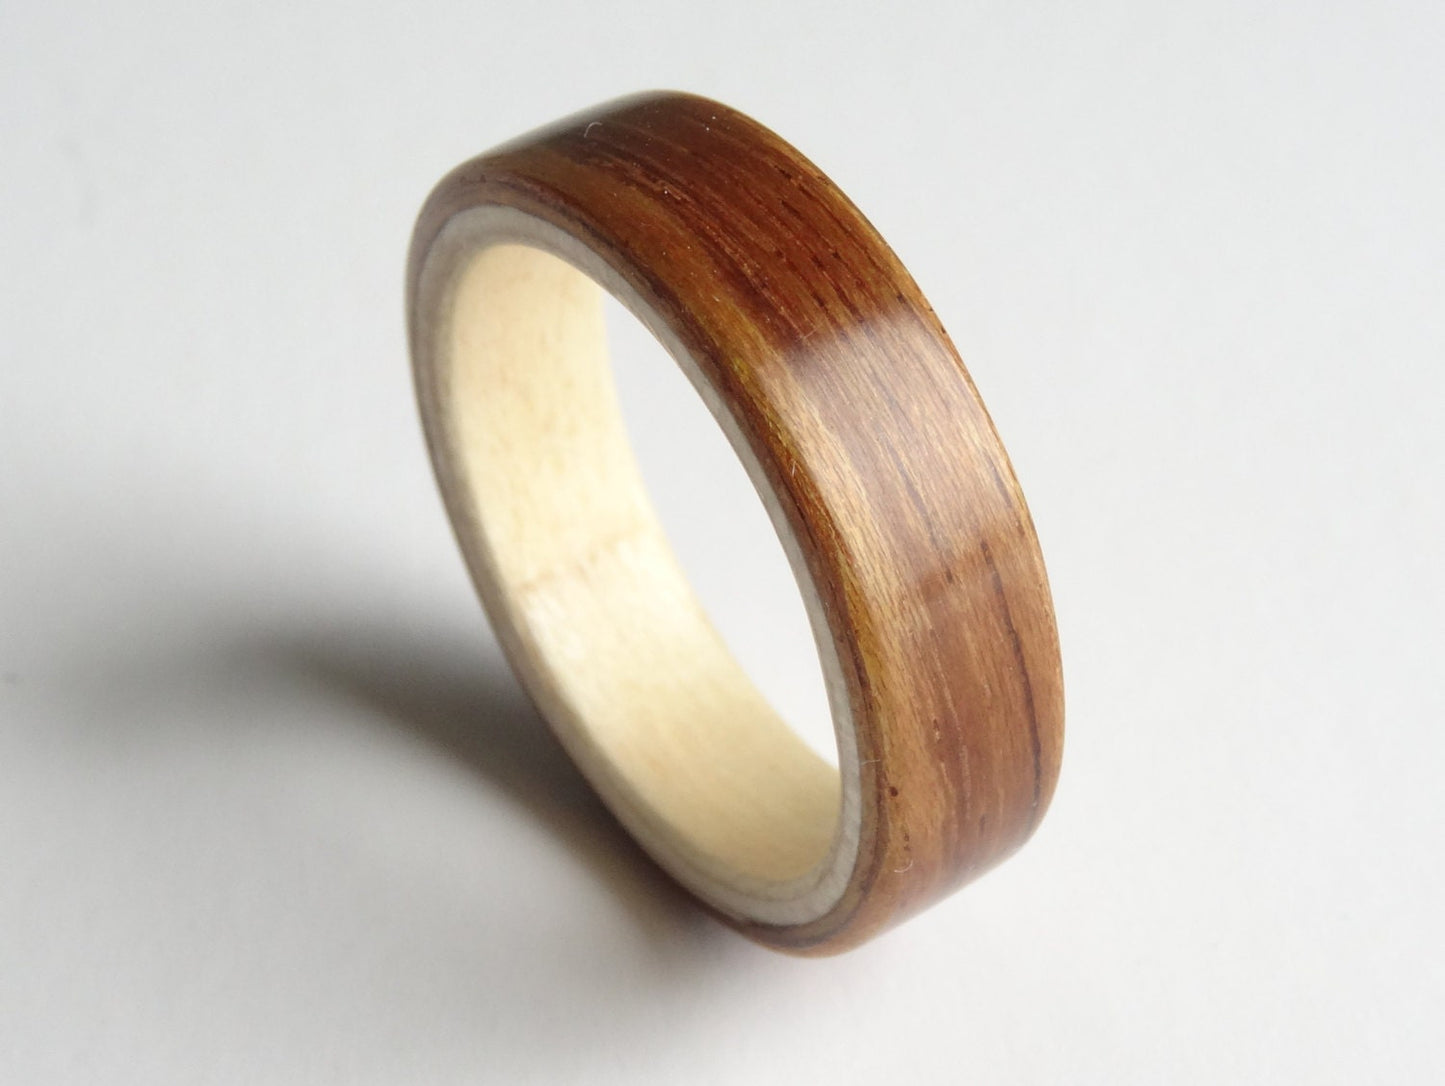 Tropical Olive and Sycamore Bent Wood Ring